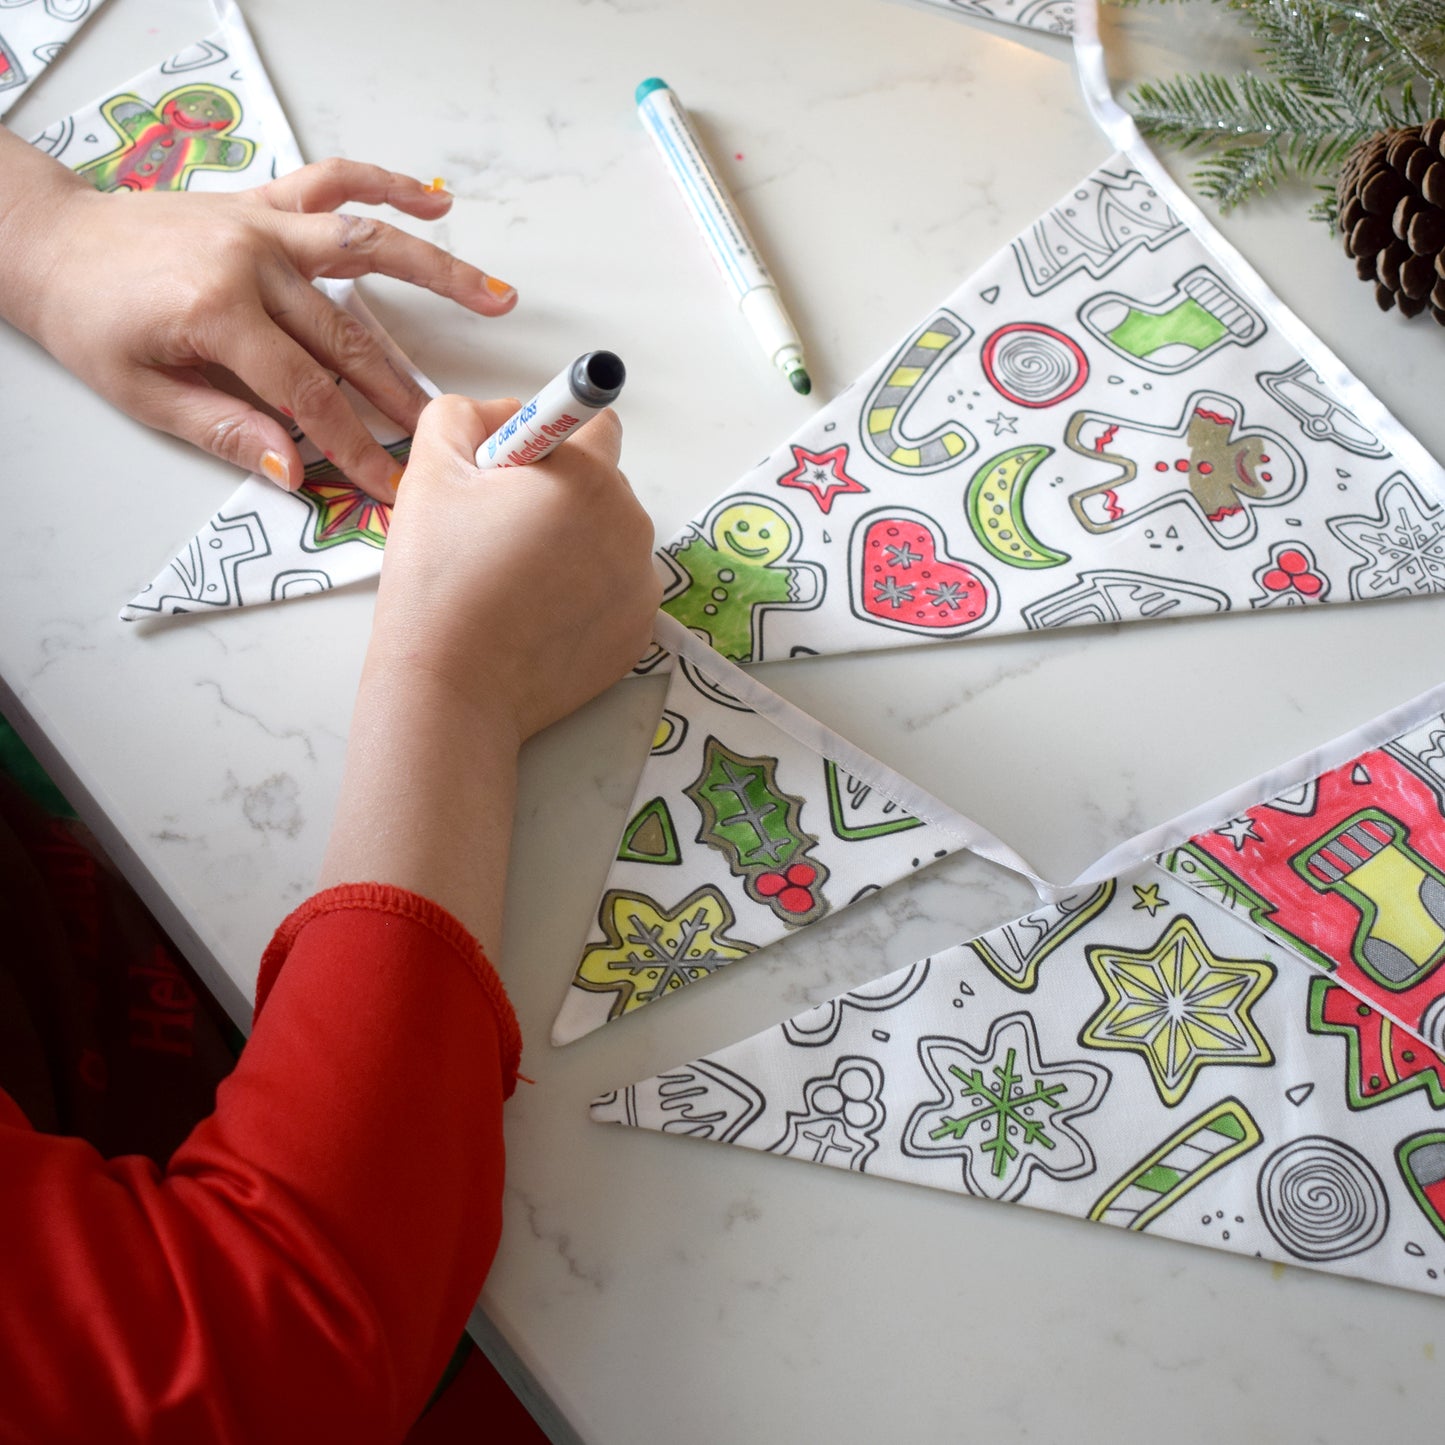 Christmas Colour in Bunting Kit